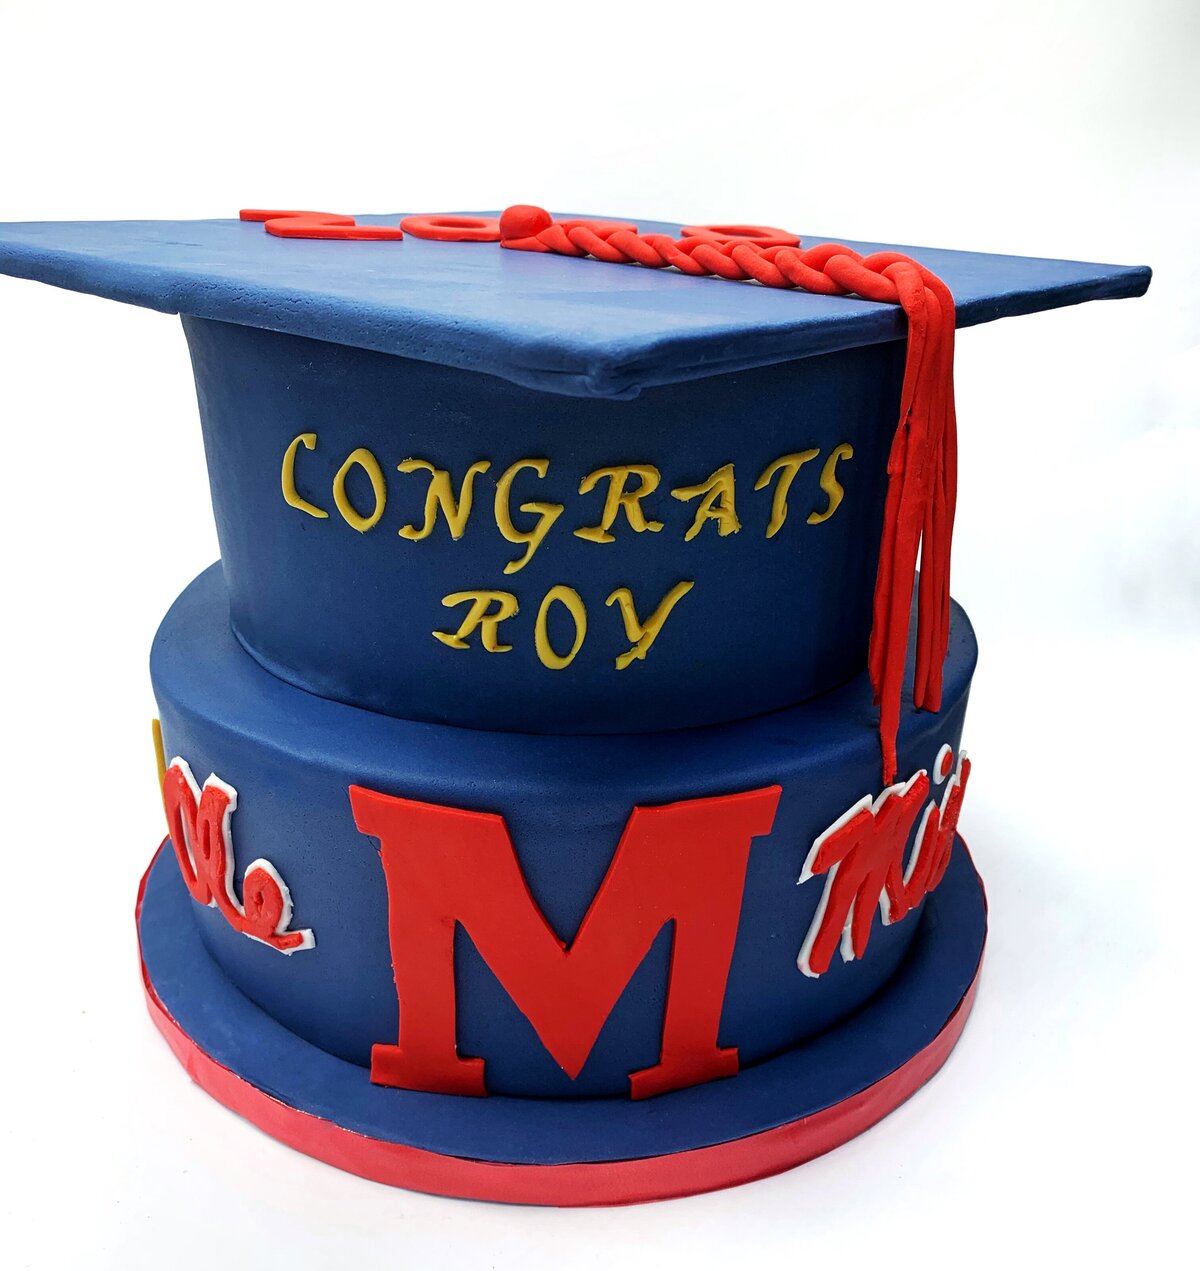 Blue and red graduation cake with fraternity and Ole Miss logos